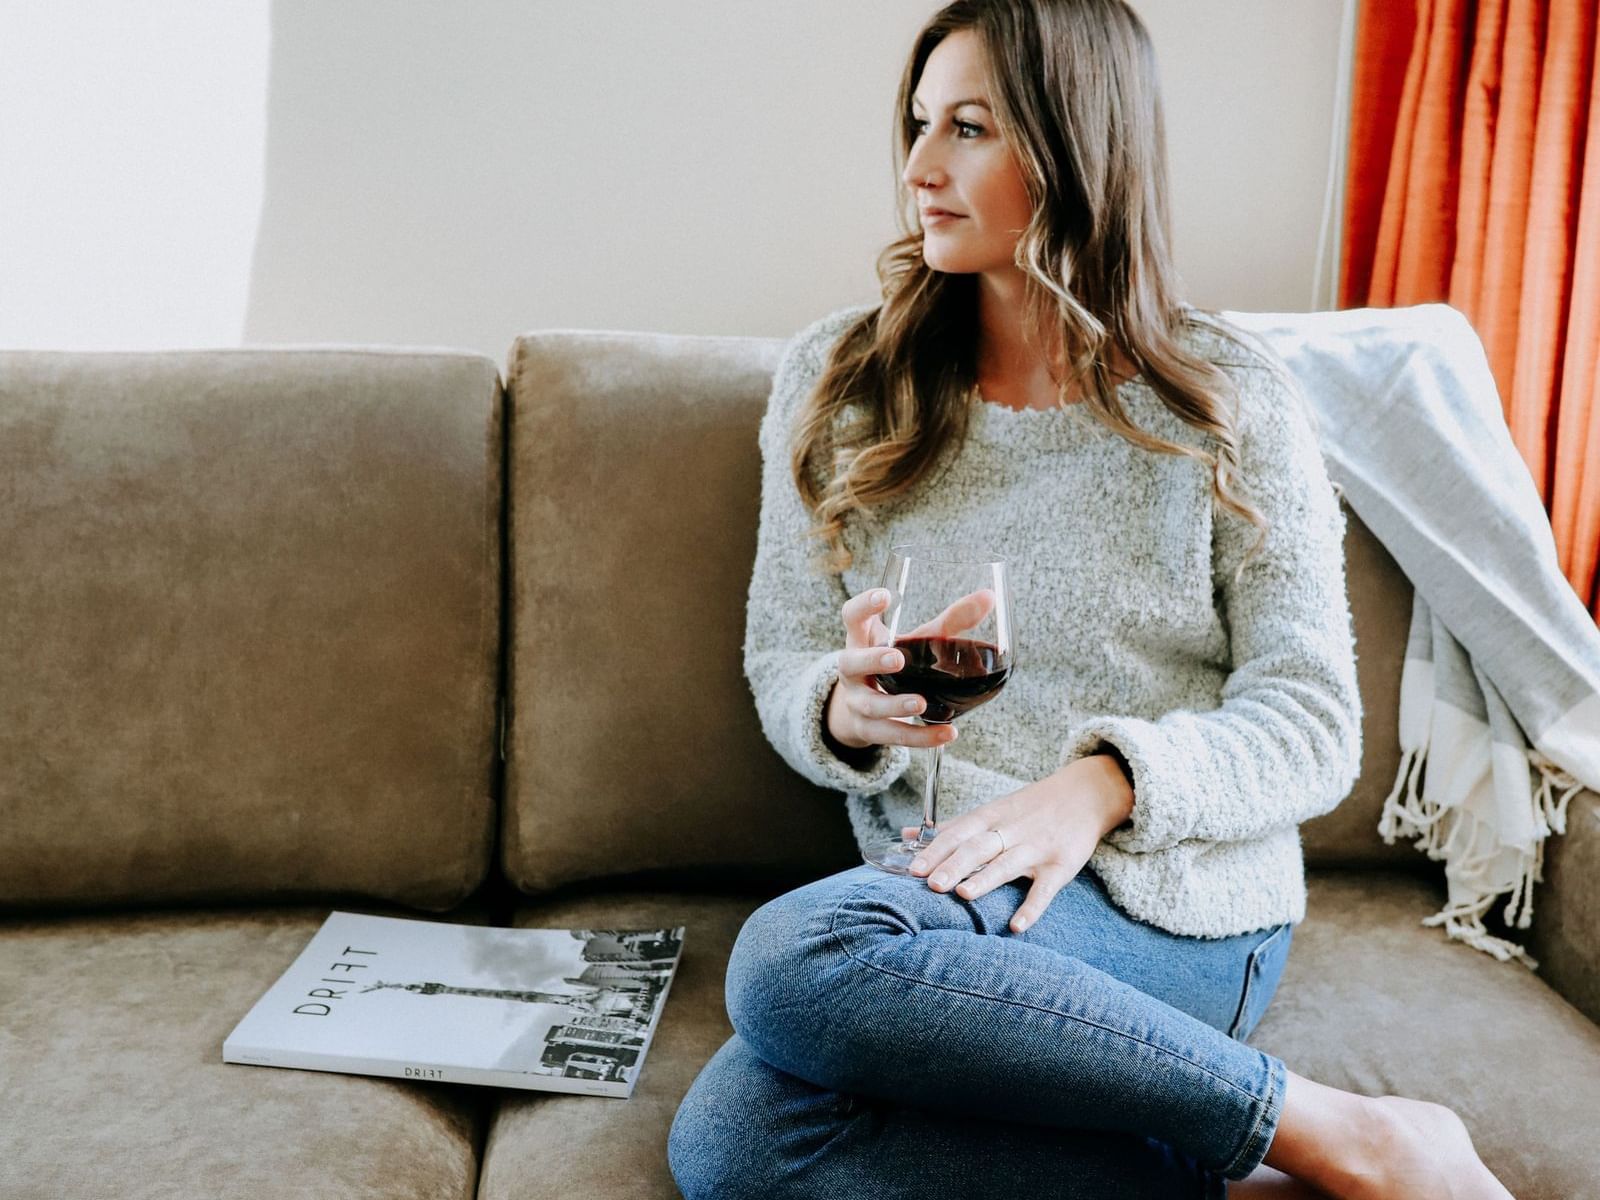 Young lady on a couch with glass of red wine.